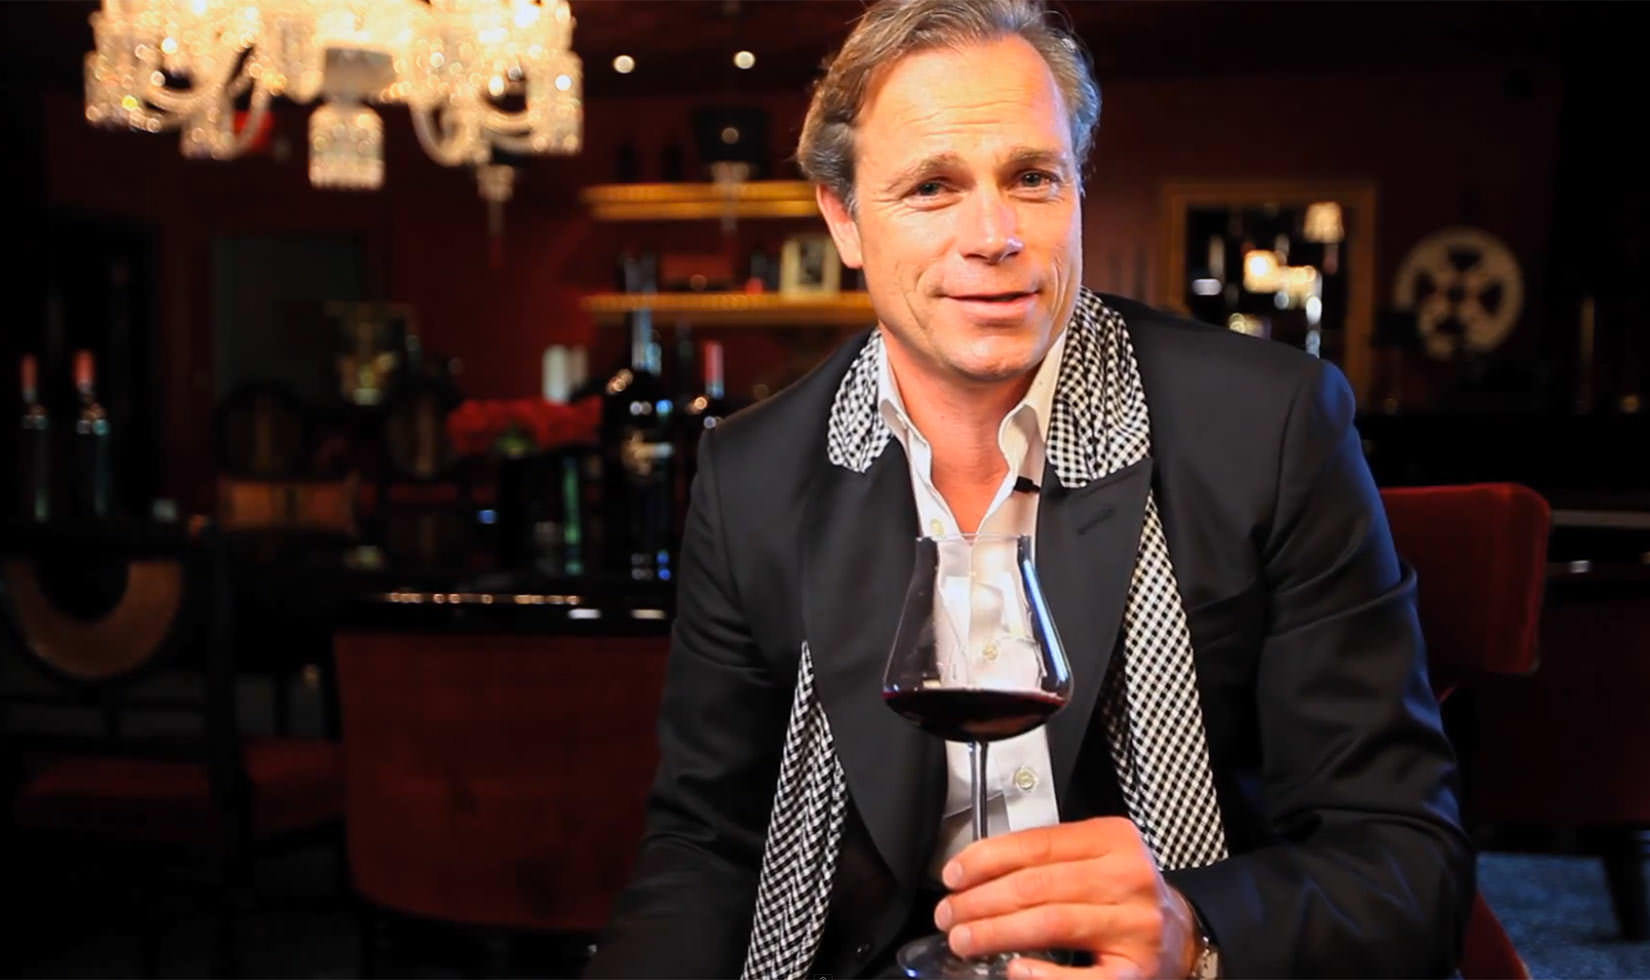 still of Jean-Charles Boisset, proprietor of the Boisset Collections speaking to the camera for a video by Jordan Winery